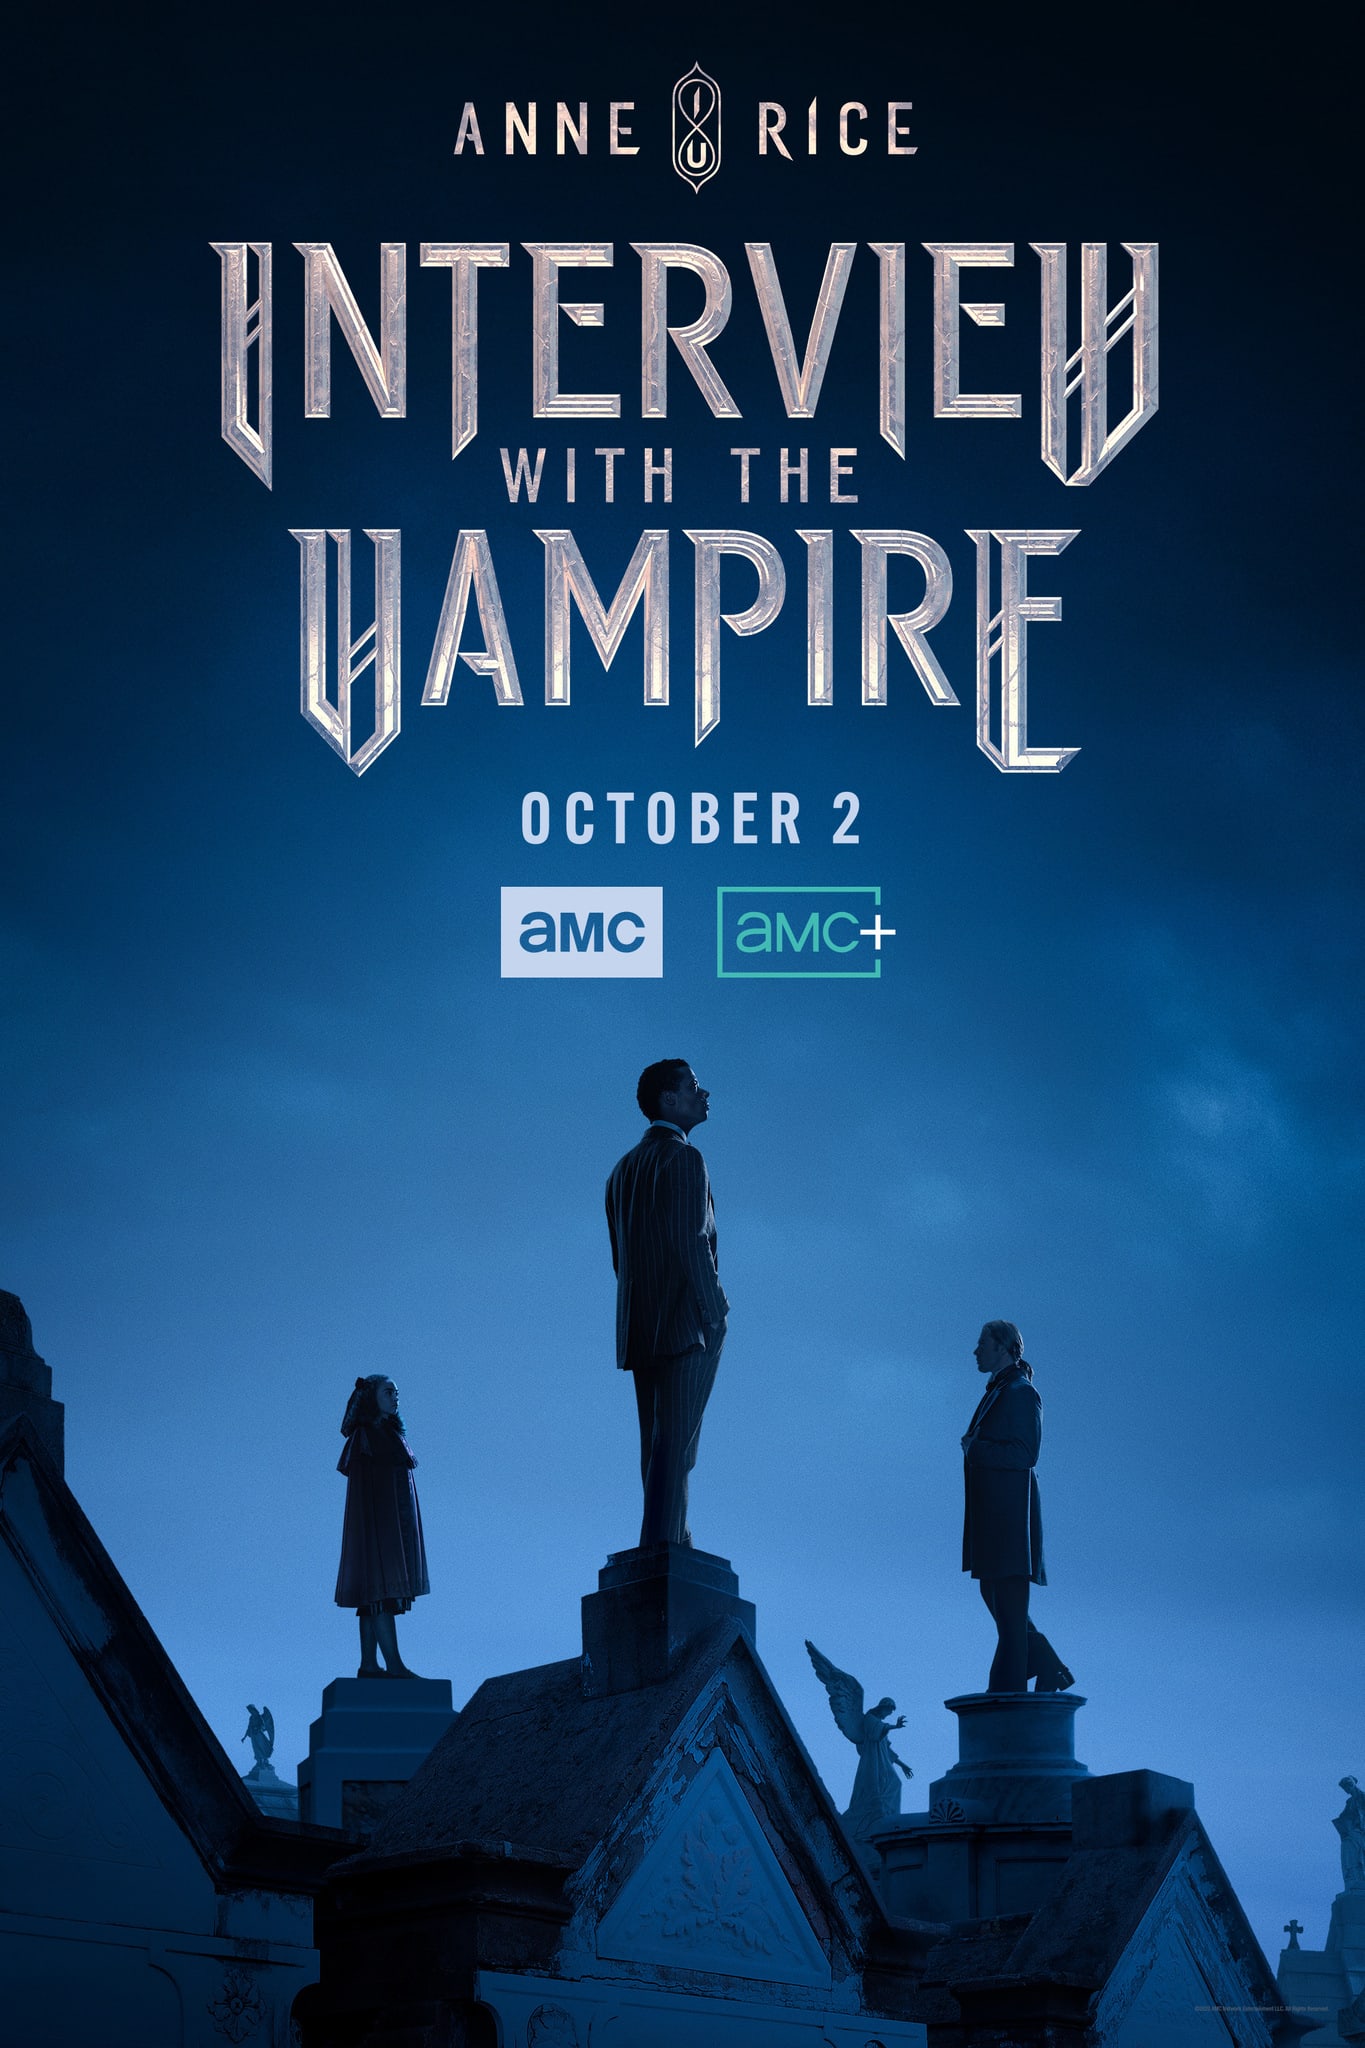 Images and trailer released for new AMC series Interview with the Vampire